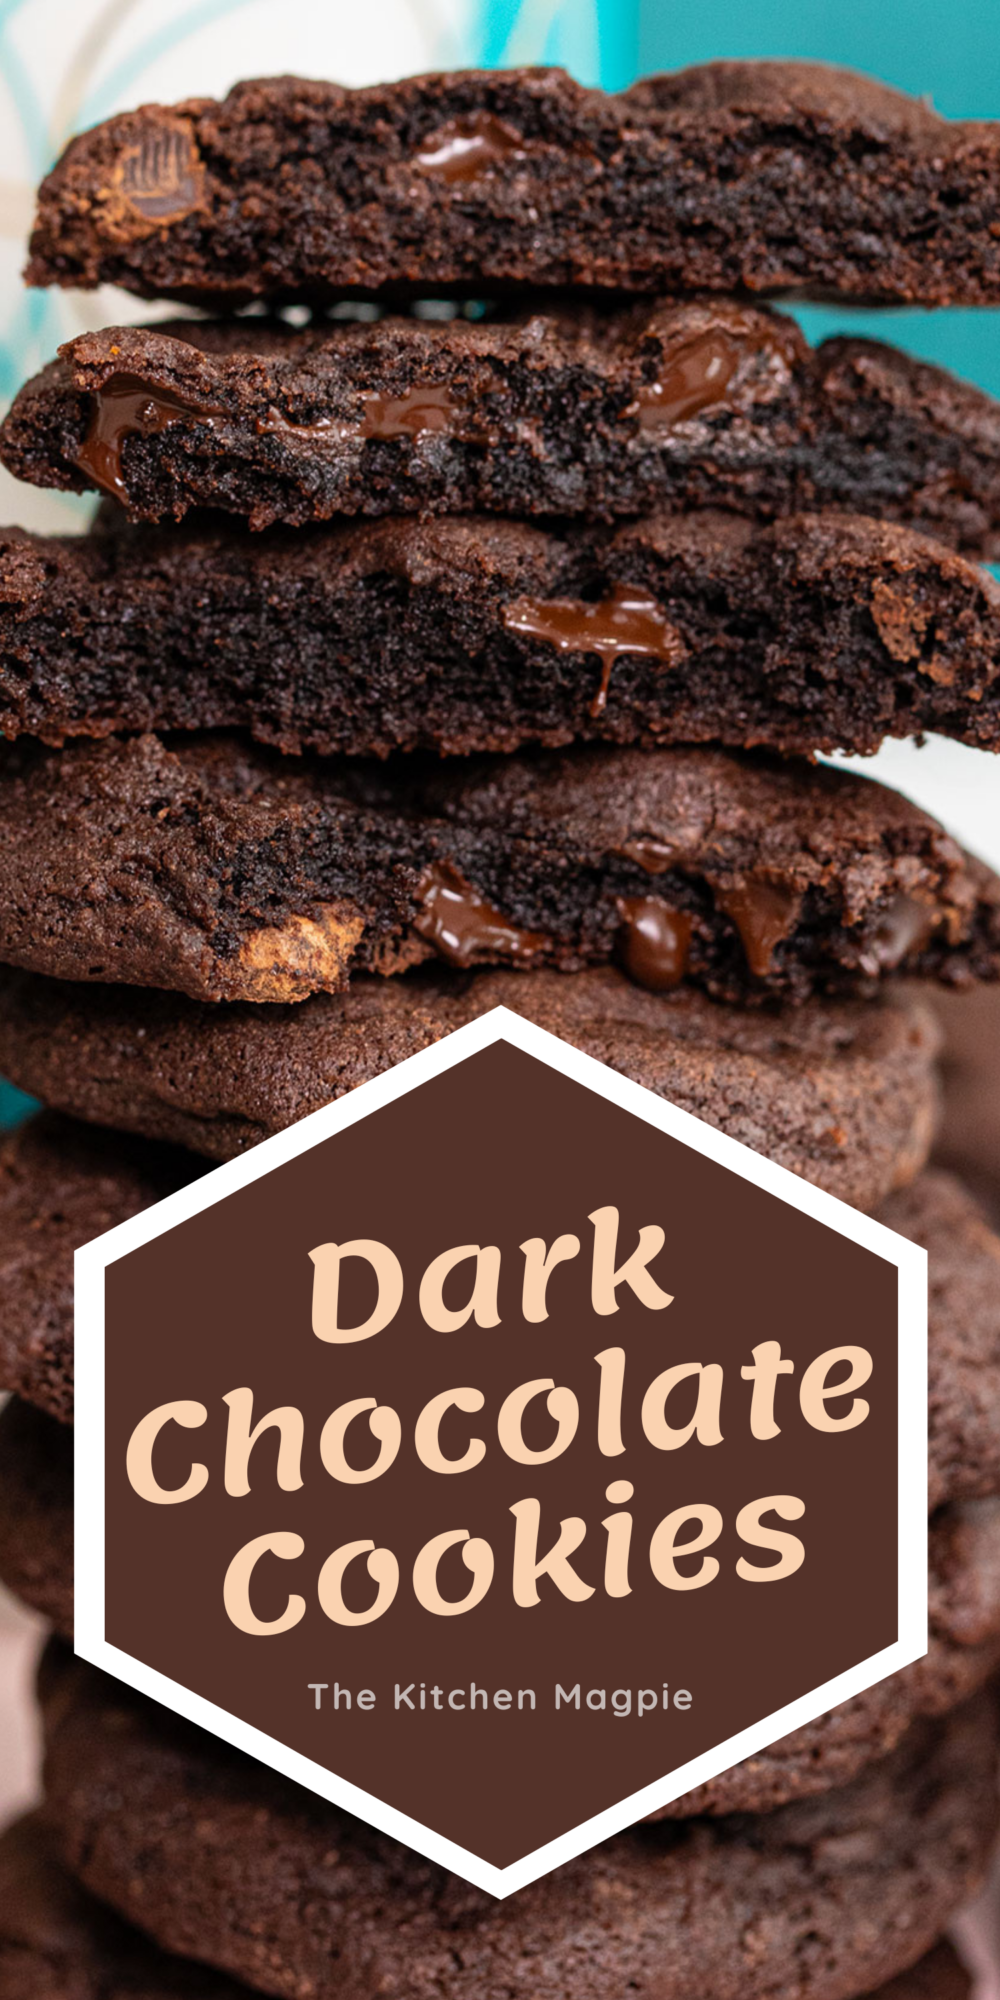 Dark chocolate chunks scattered throughout a soft and chewy cookie creating pockets of chocolate gooey goodness.